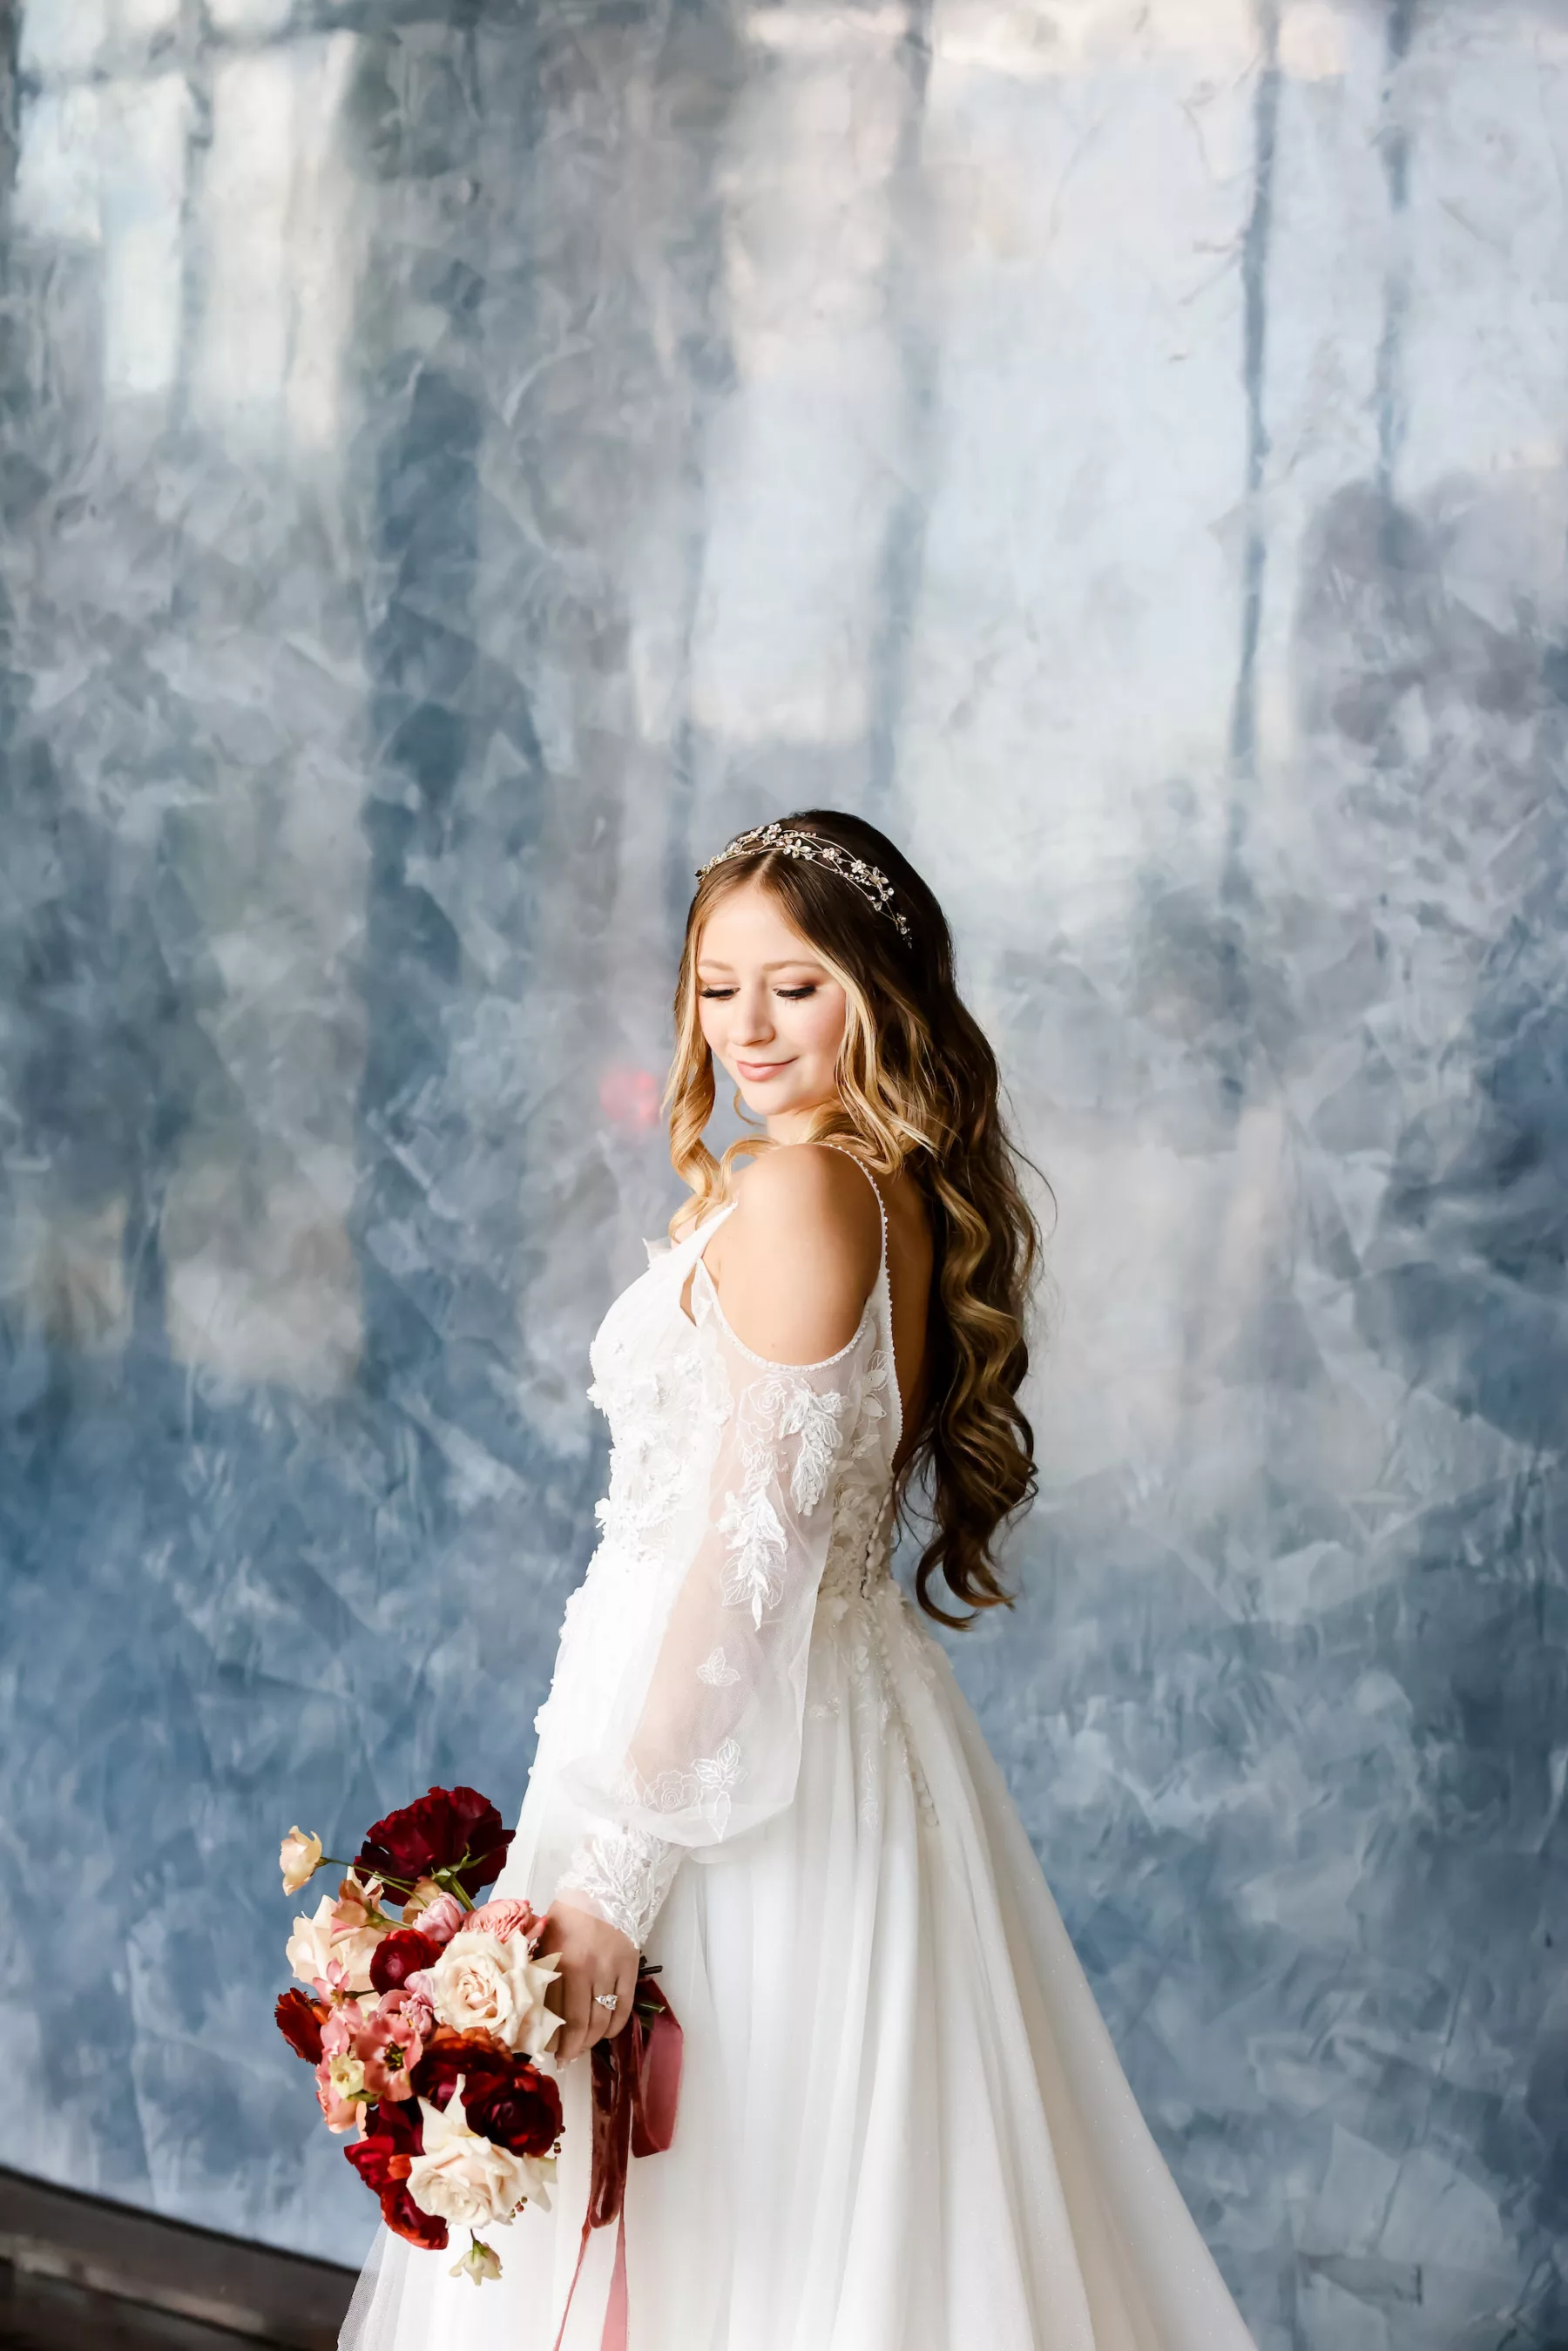 Bride Getting Ready Wedding Portrait | White Lace and Tulle Cold Shoulder A-Line Wedding Dress Ideas | Romantic Hair and Makeup Inspiration | Boutique Truly Forever Bridal Tampa | Ybor Photographer Lifelong Photography Studio | Hair and Makeup Artist Adore Bridal Services